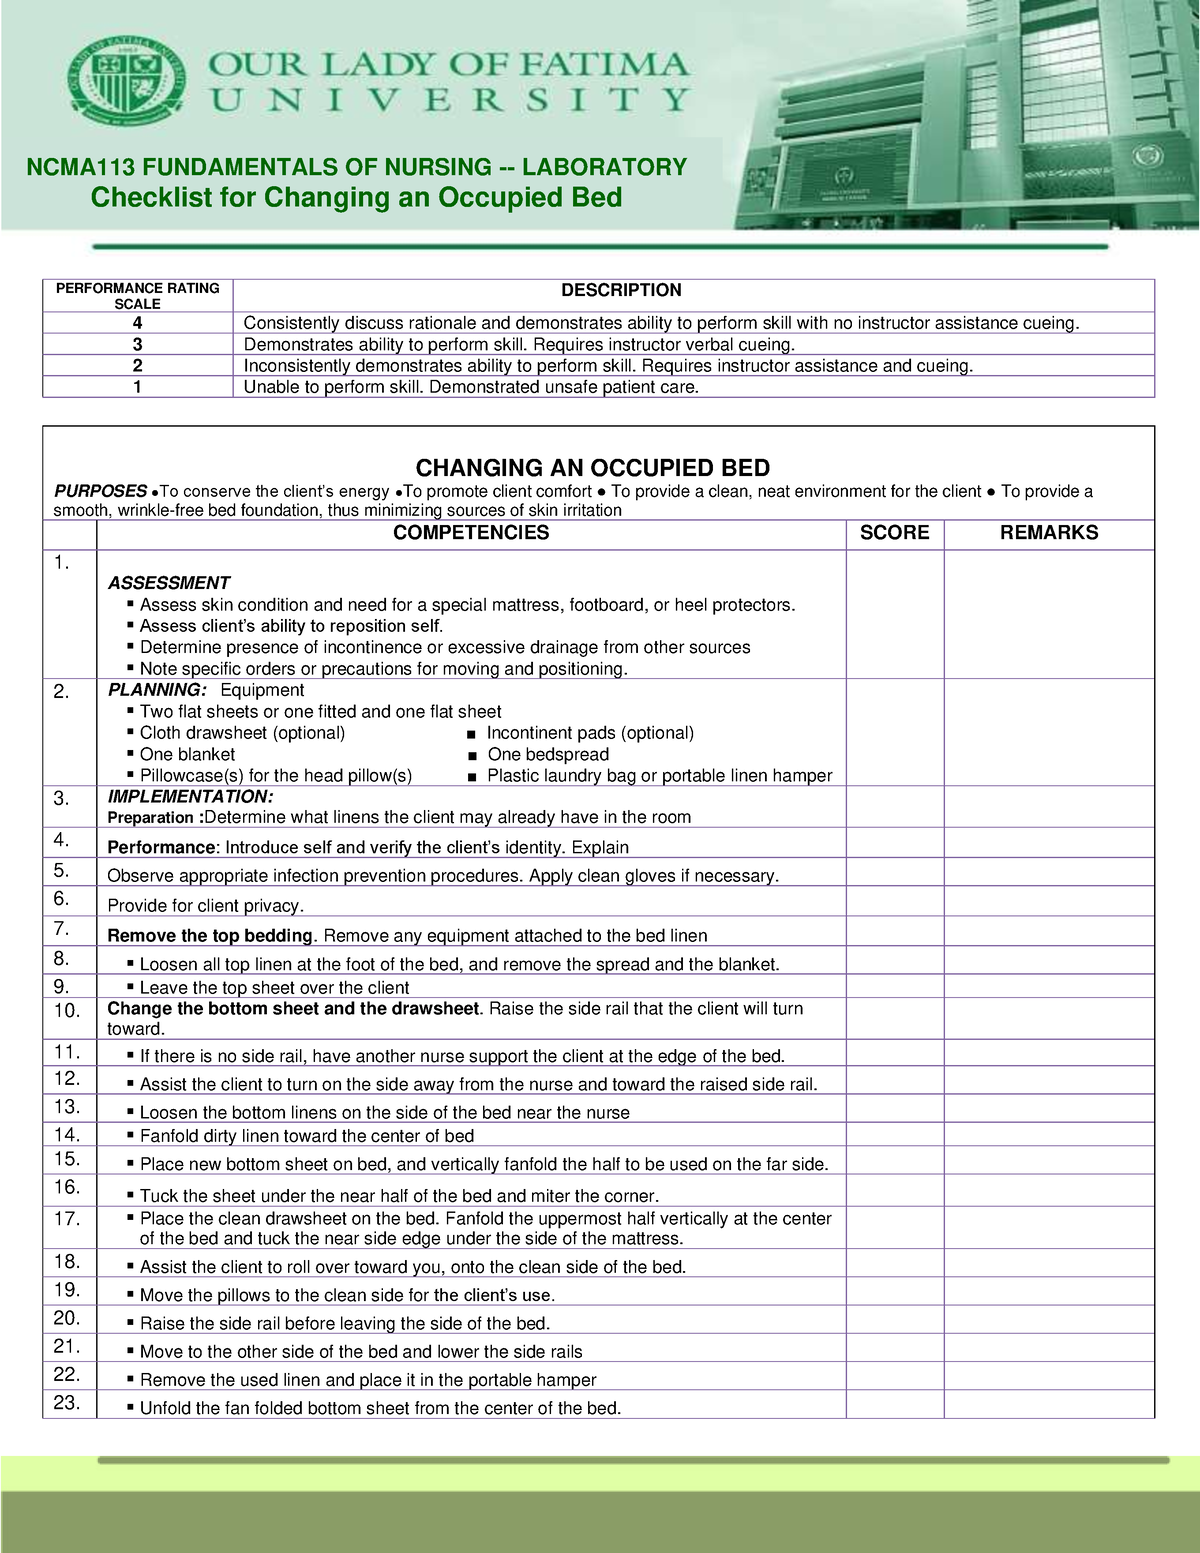 NCMA113 Checklist for Changing An Occupied Bed - PERFORMANCE RATING ...